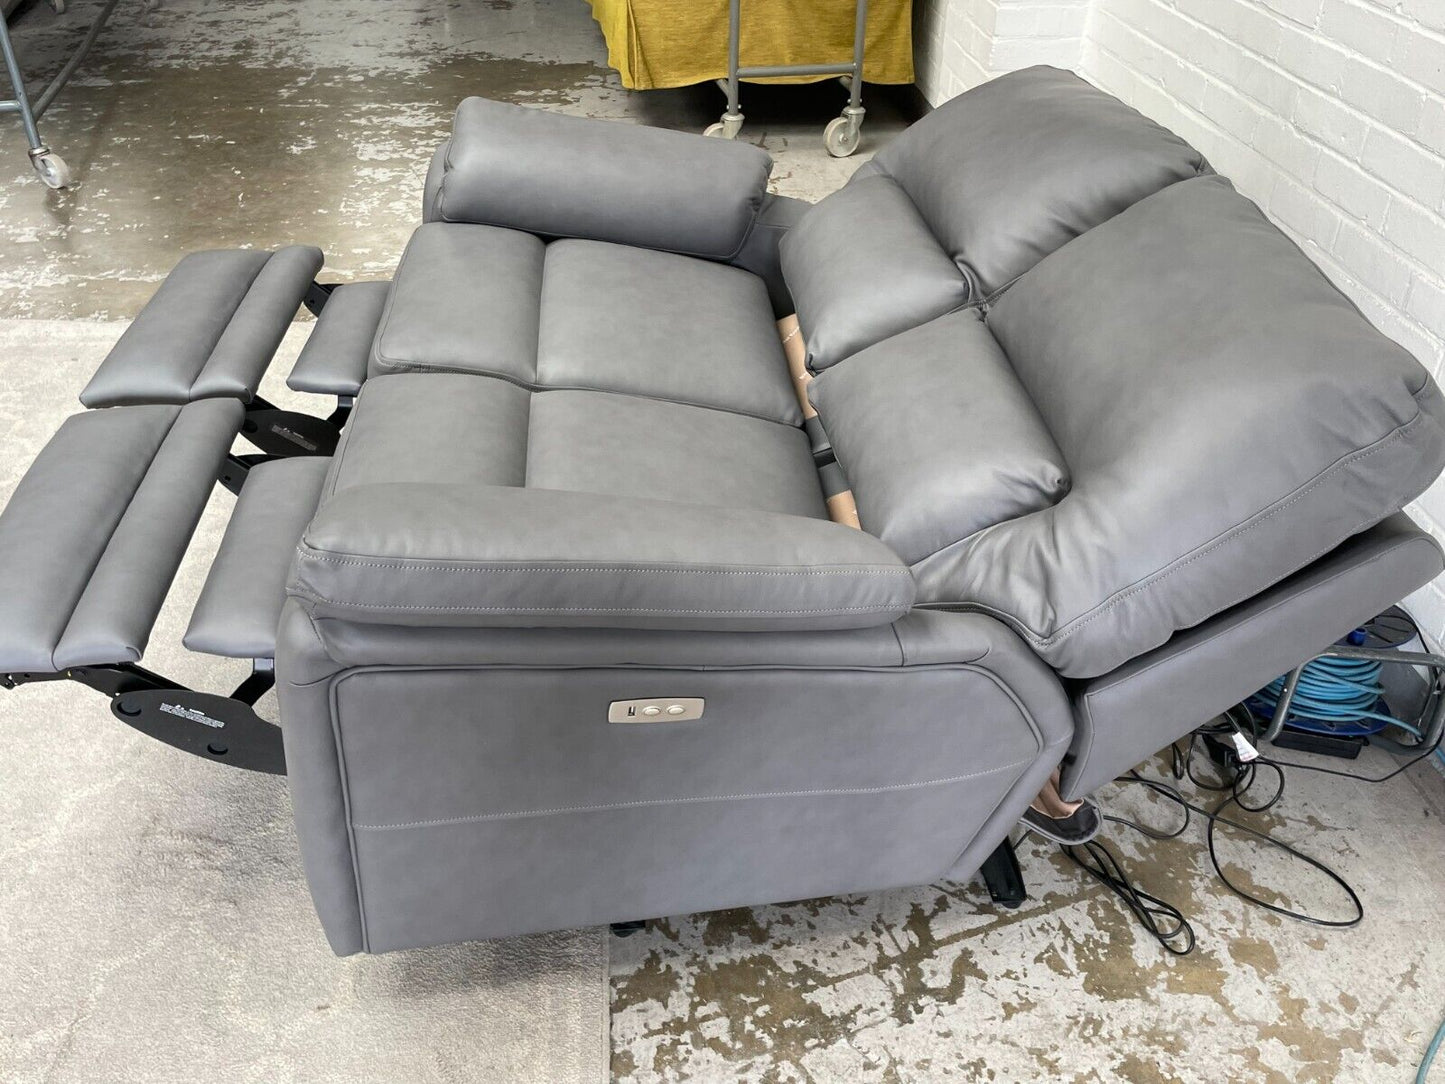 Parker Knoll Hampton Grey Leather Power Recliner 2 Seater Sofa